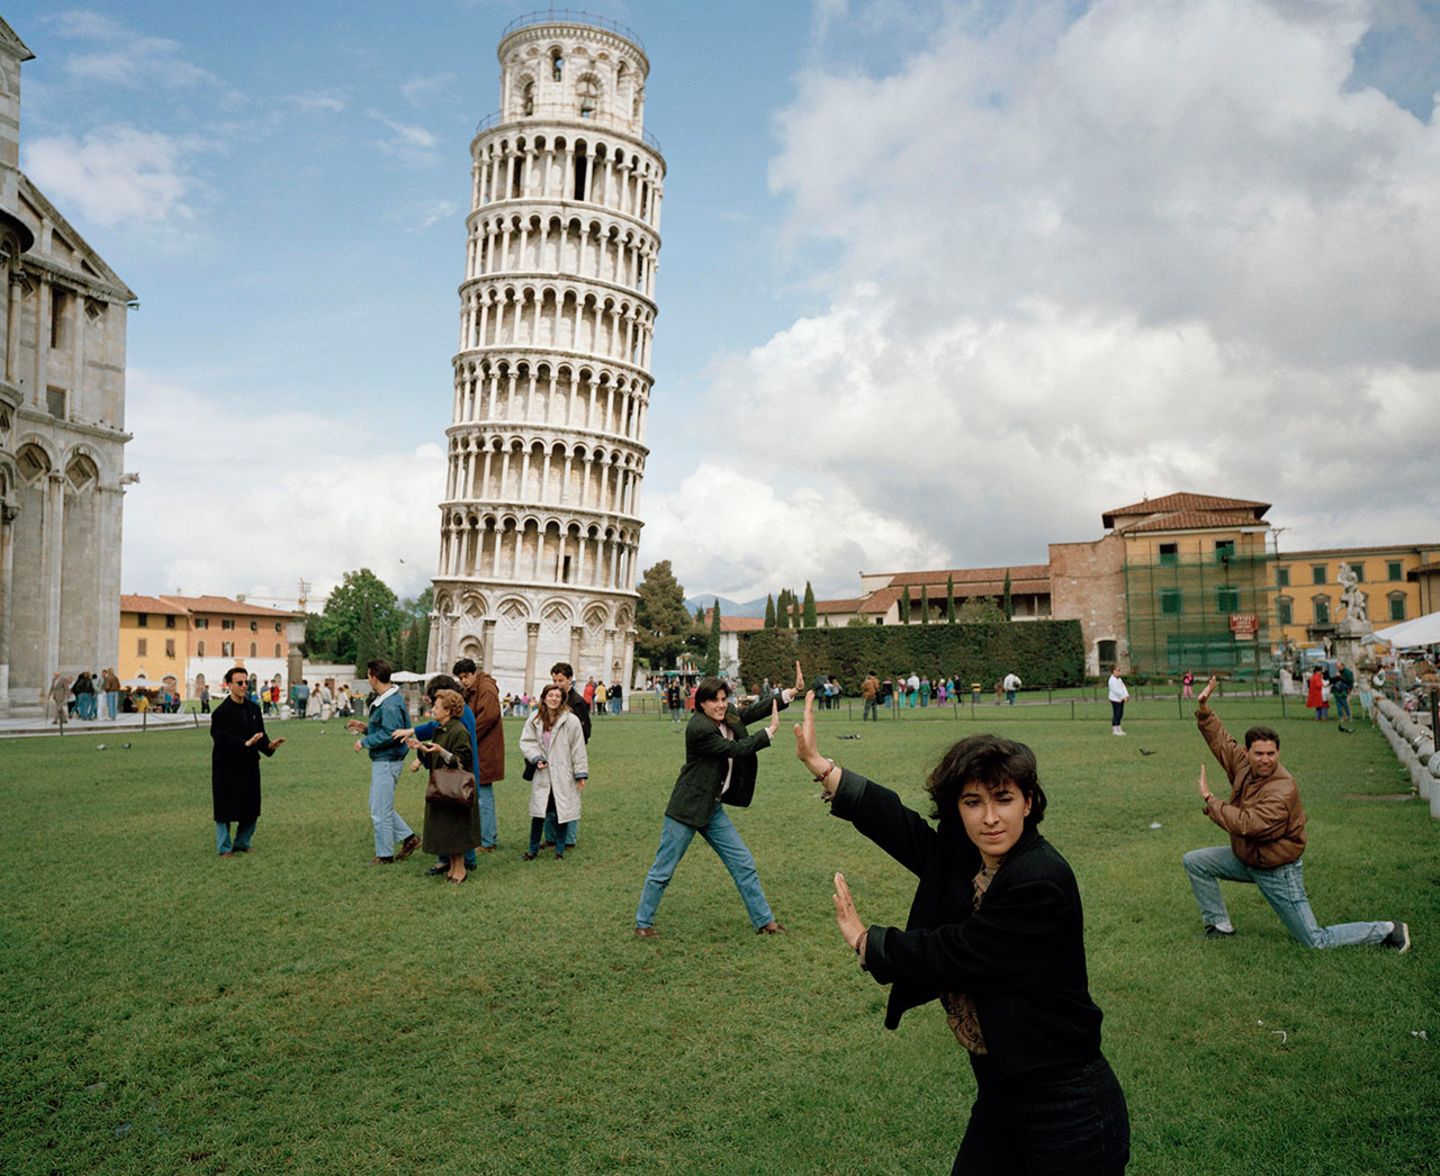 Martin Parr / The Leaning Tower of Pisa, Italy, 1990